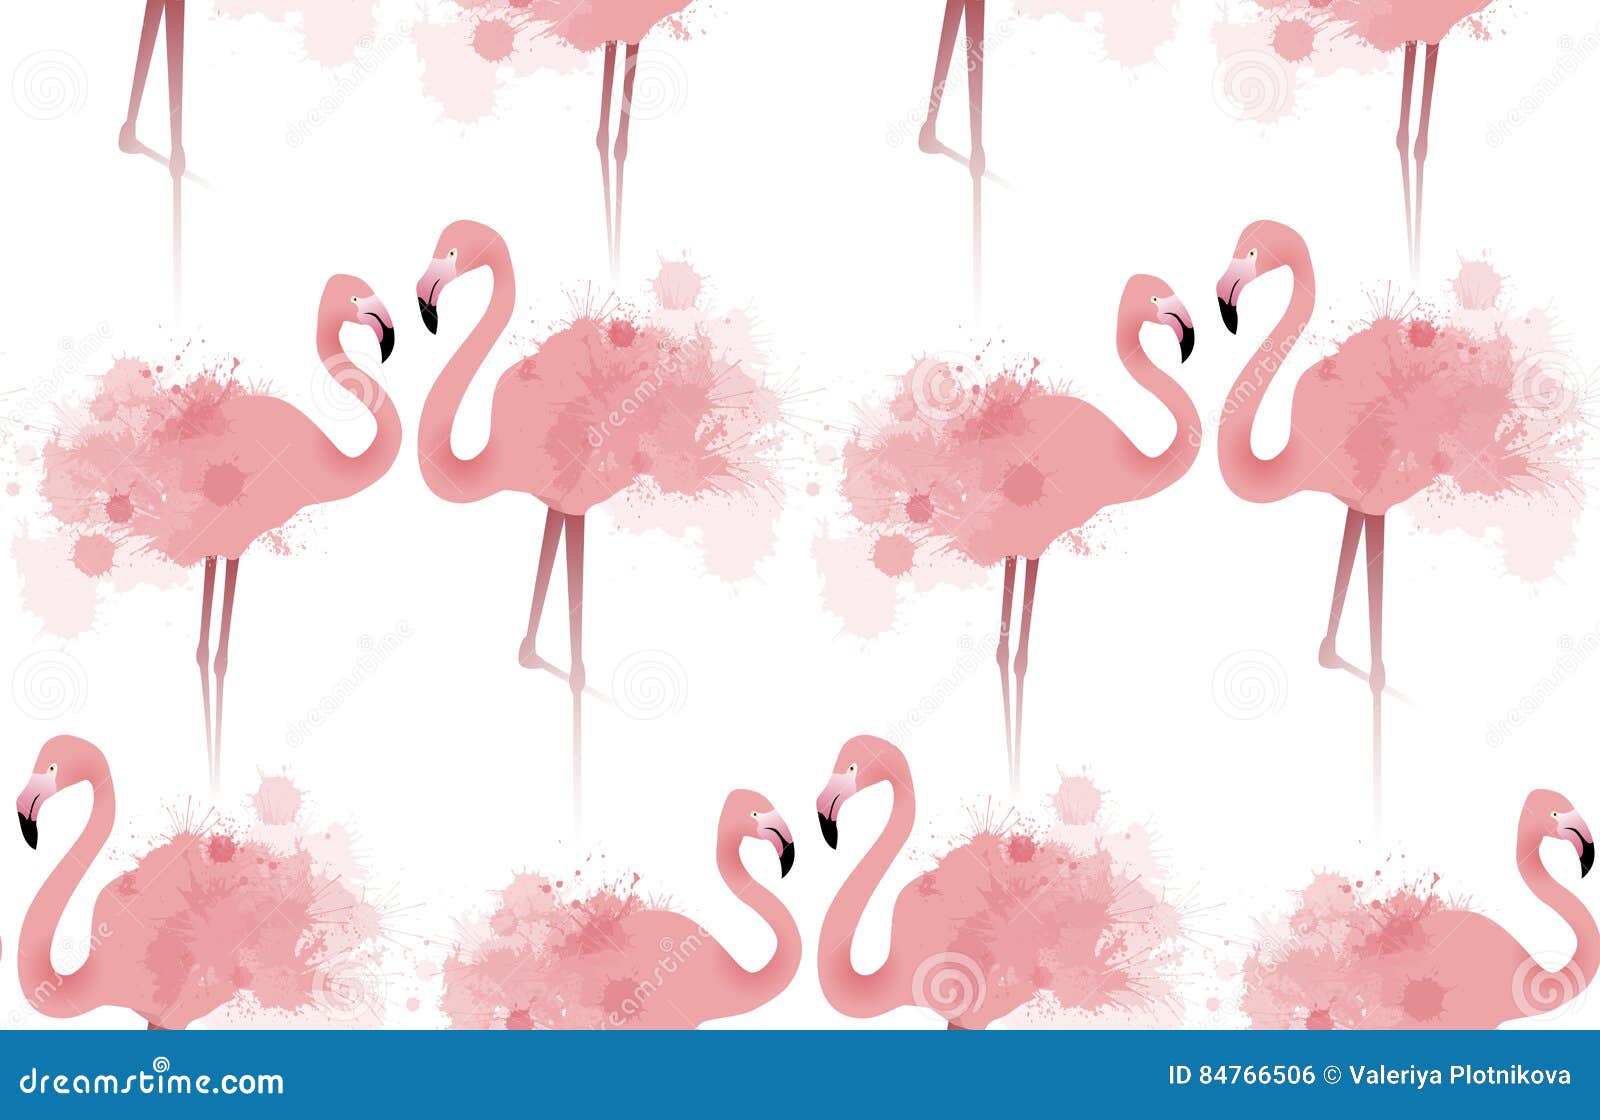 Seamless Texture With Delicate Pink Flamingos  Stock Vector 